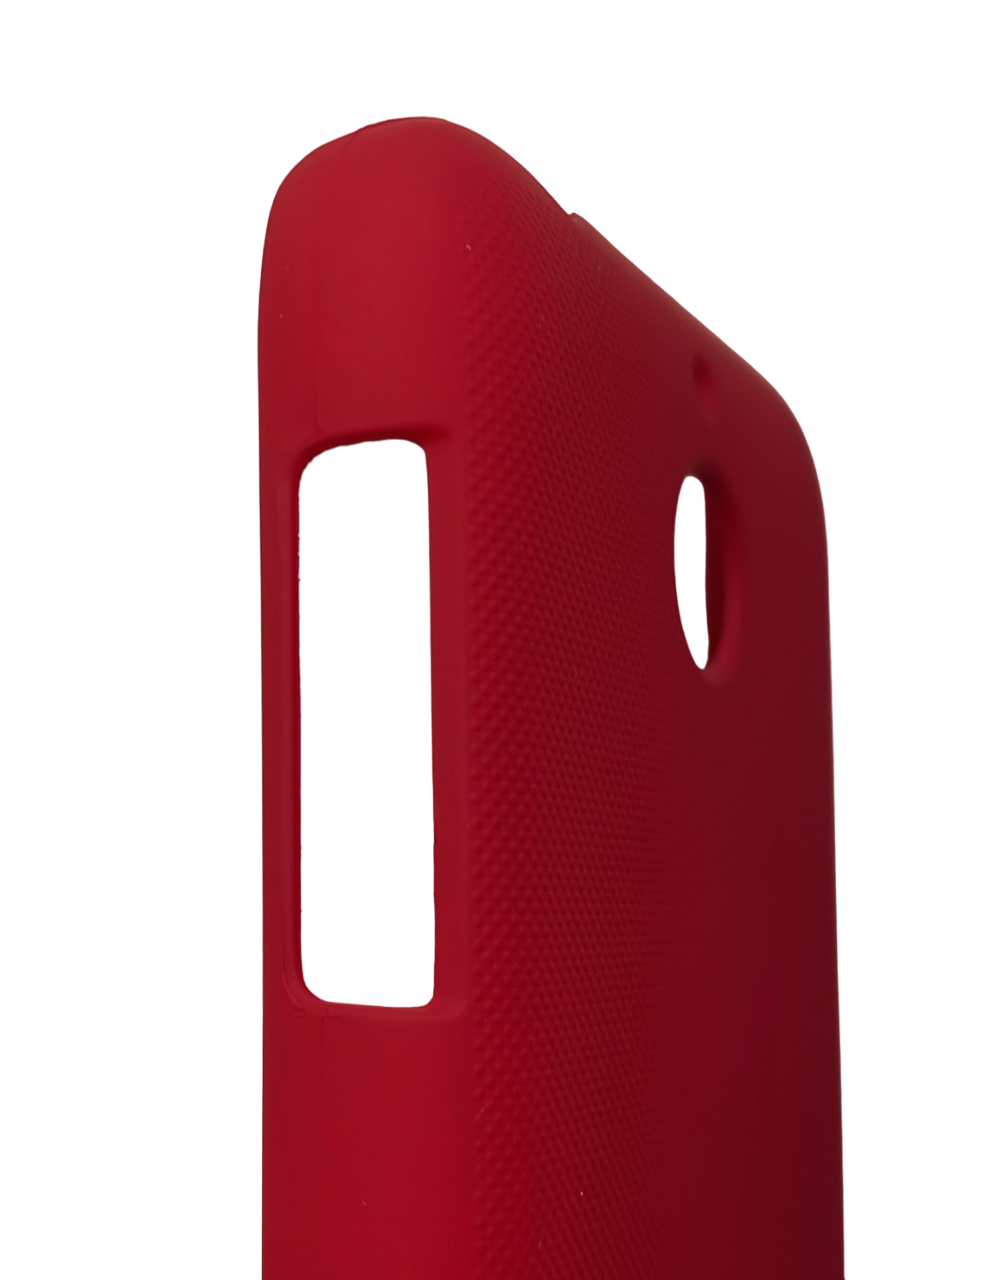 Nillkin Frosted Shield Matte Quality Phone Case For HTC Desire 510 - Red Nillkin - фотография #3